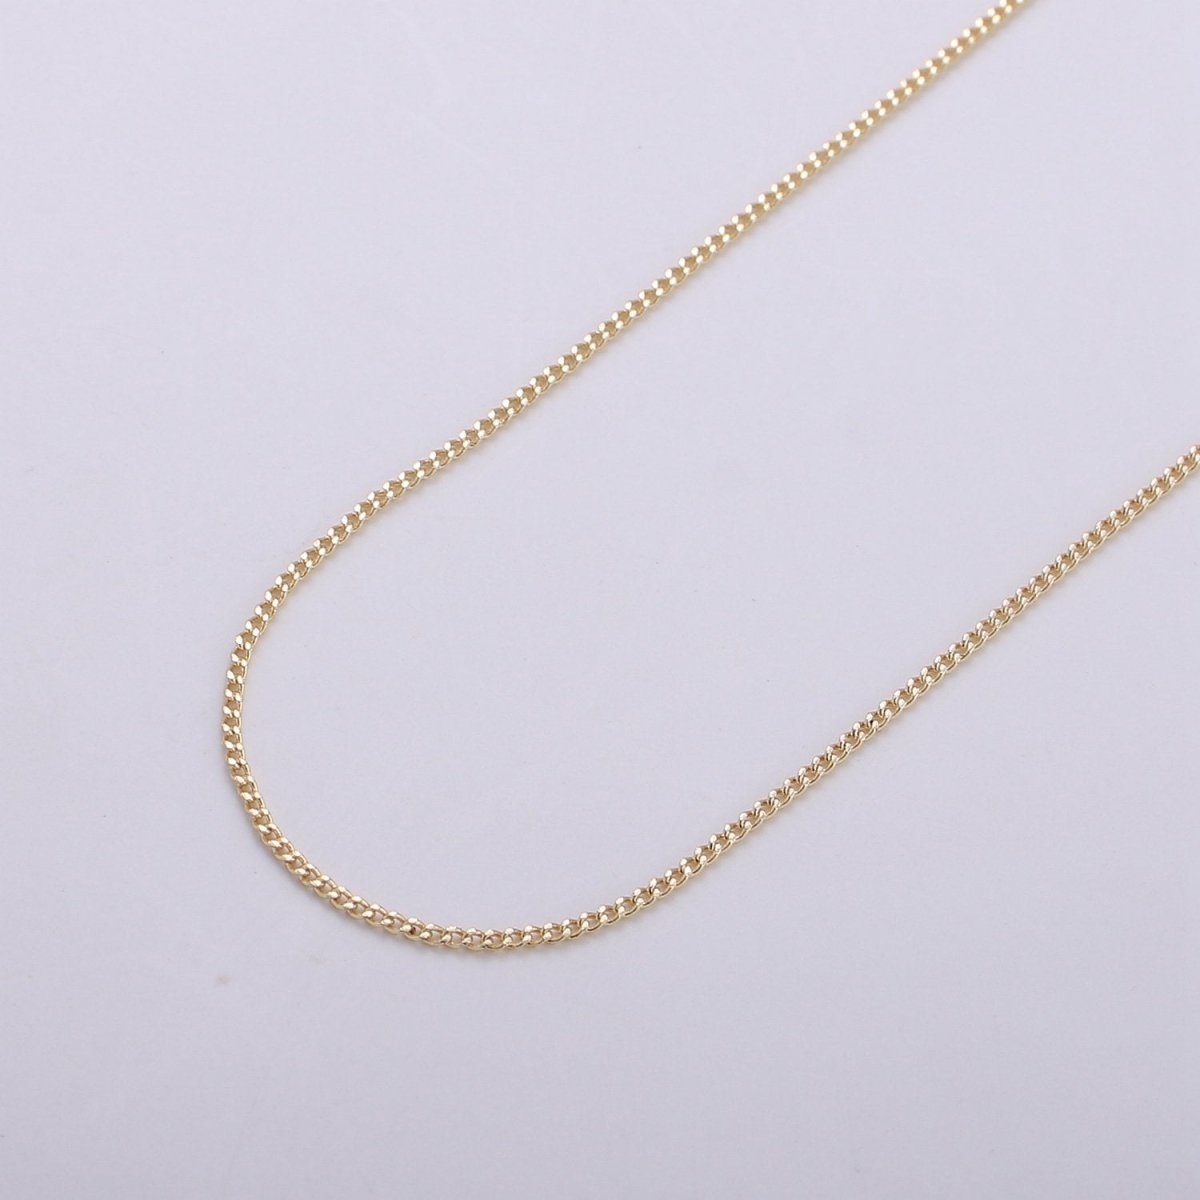 16K Gold Filled Curb Chain -3mm width - Unfinished Chain by Yard | ROLL-310 - DLUXCA